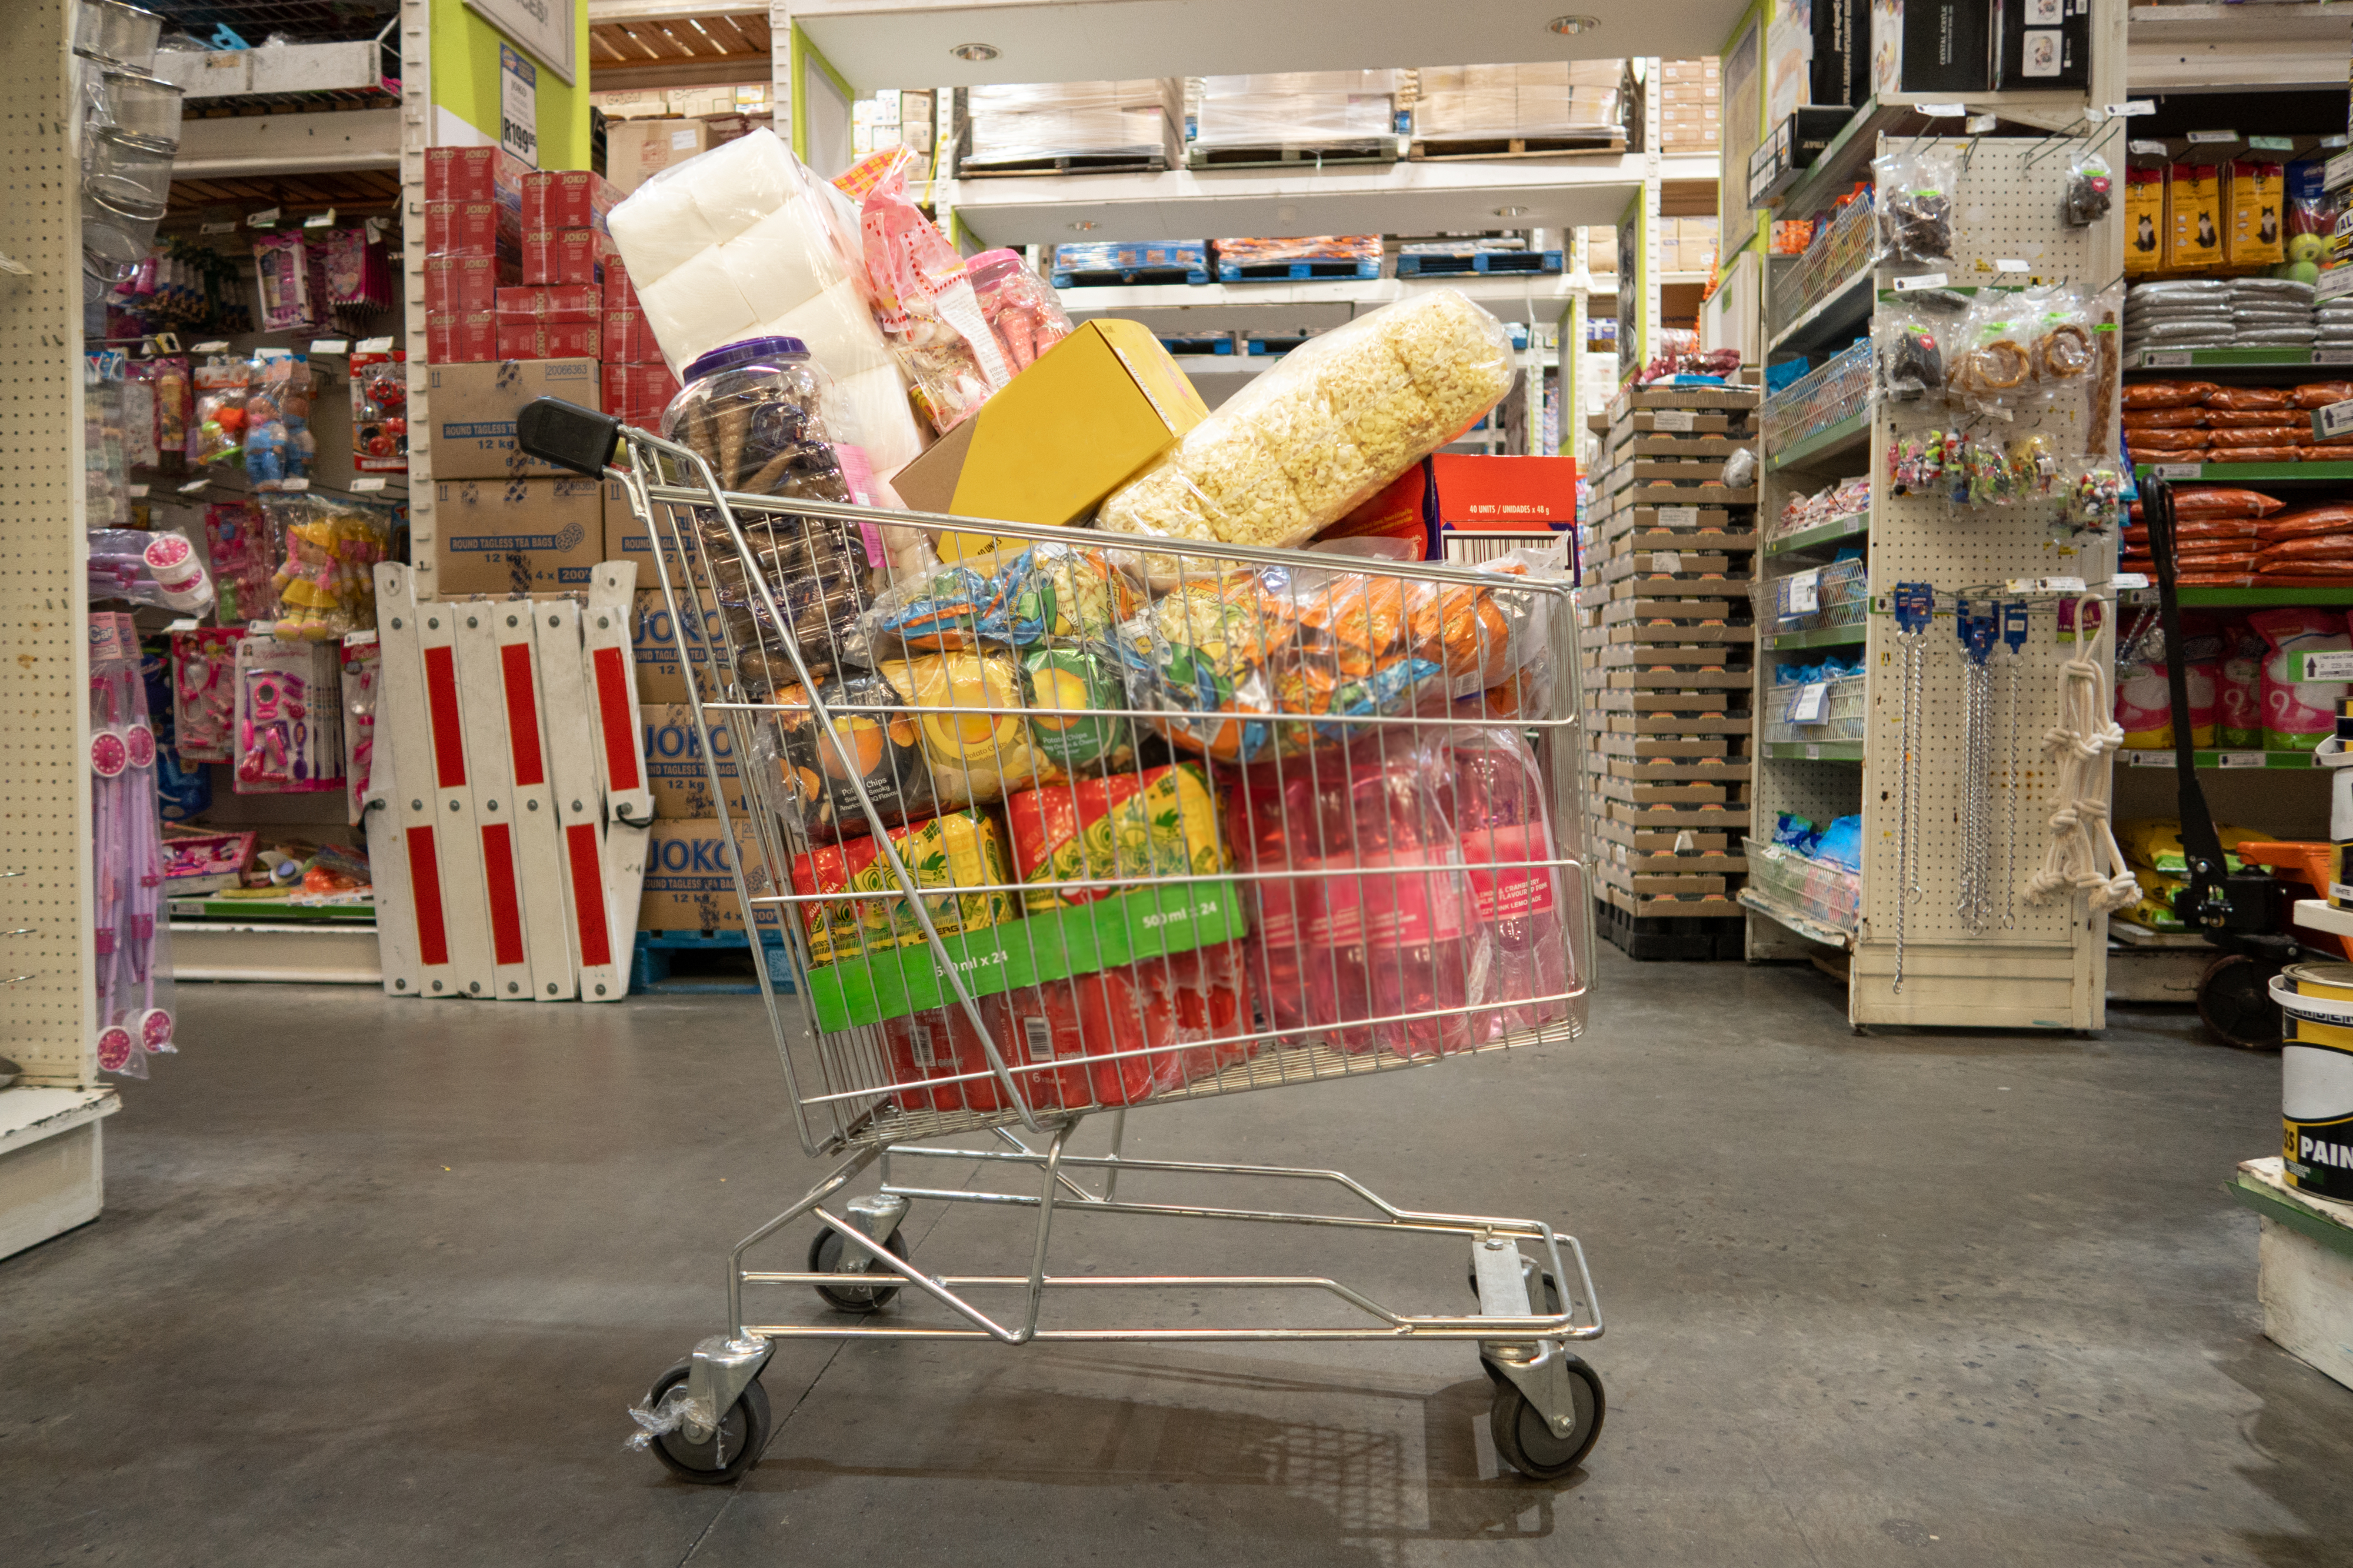 A shopping cart filled with various bulk sized household supplies and groceries inside a supermarket aisle